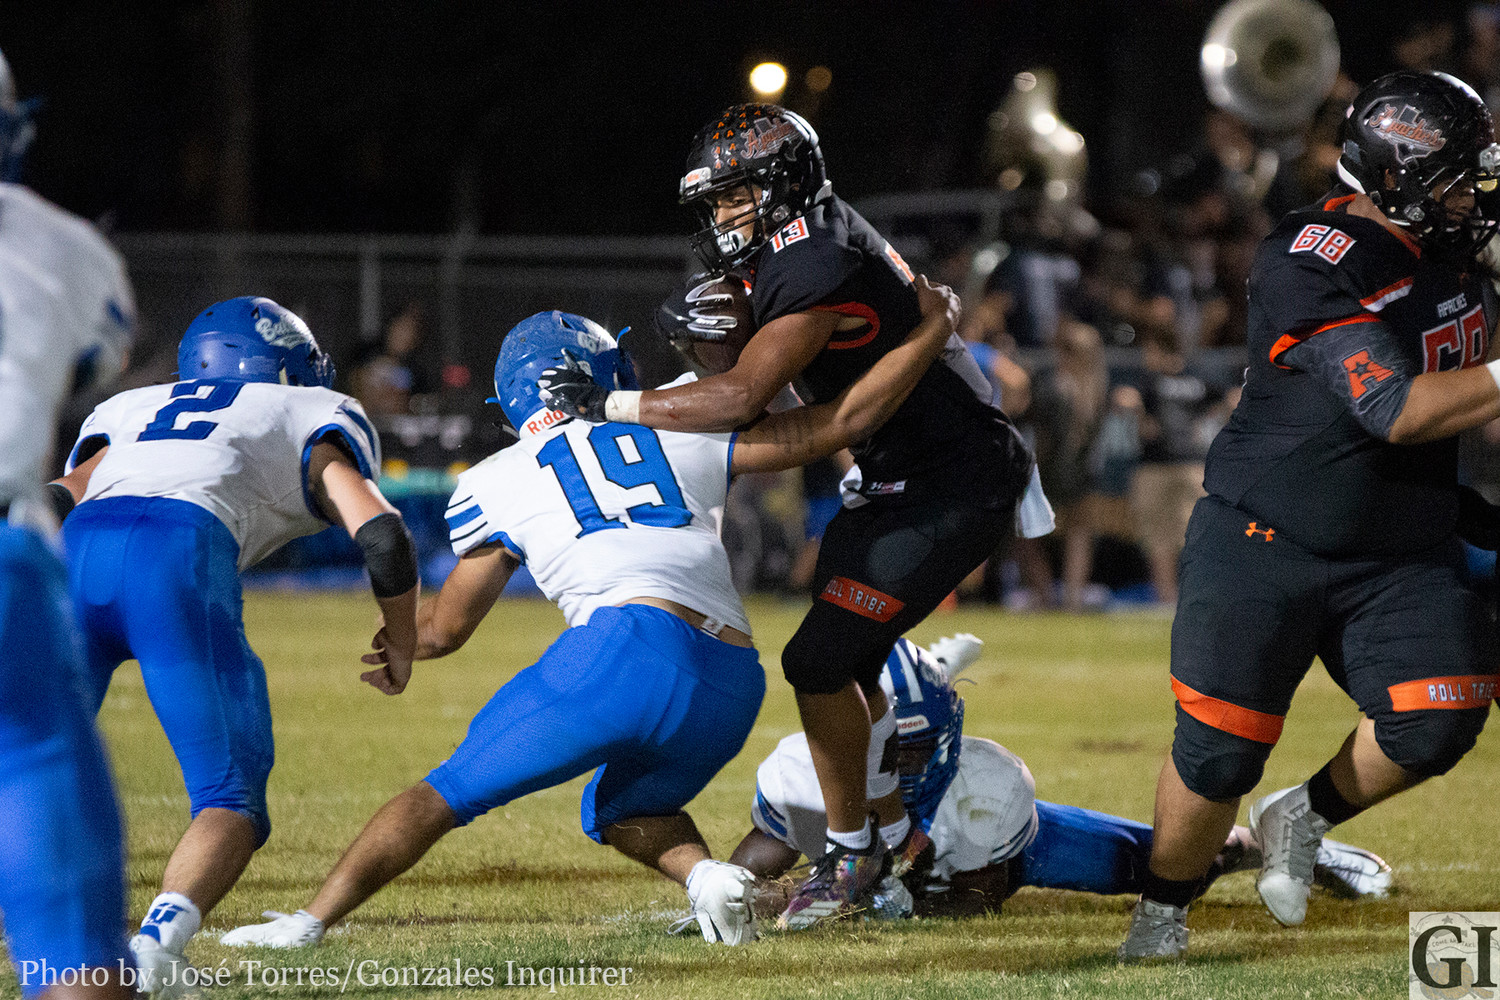 James Martinez (13) tries to break a tackle in Gonzales' 33-14 loss against Yoakum on Thursday night at Apache Field.